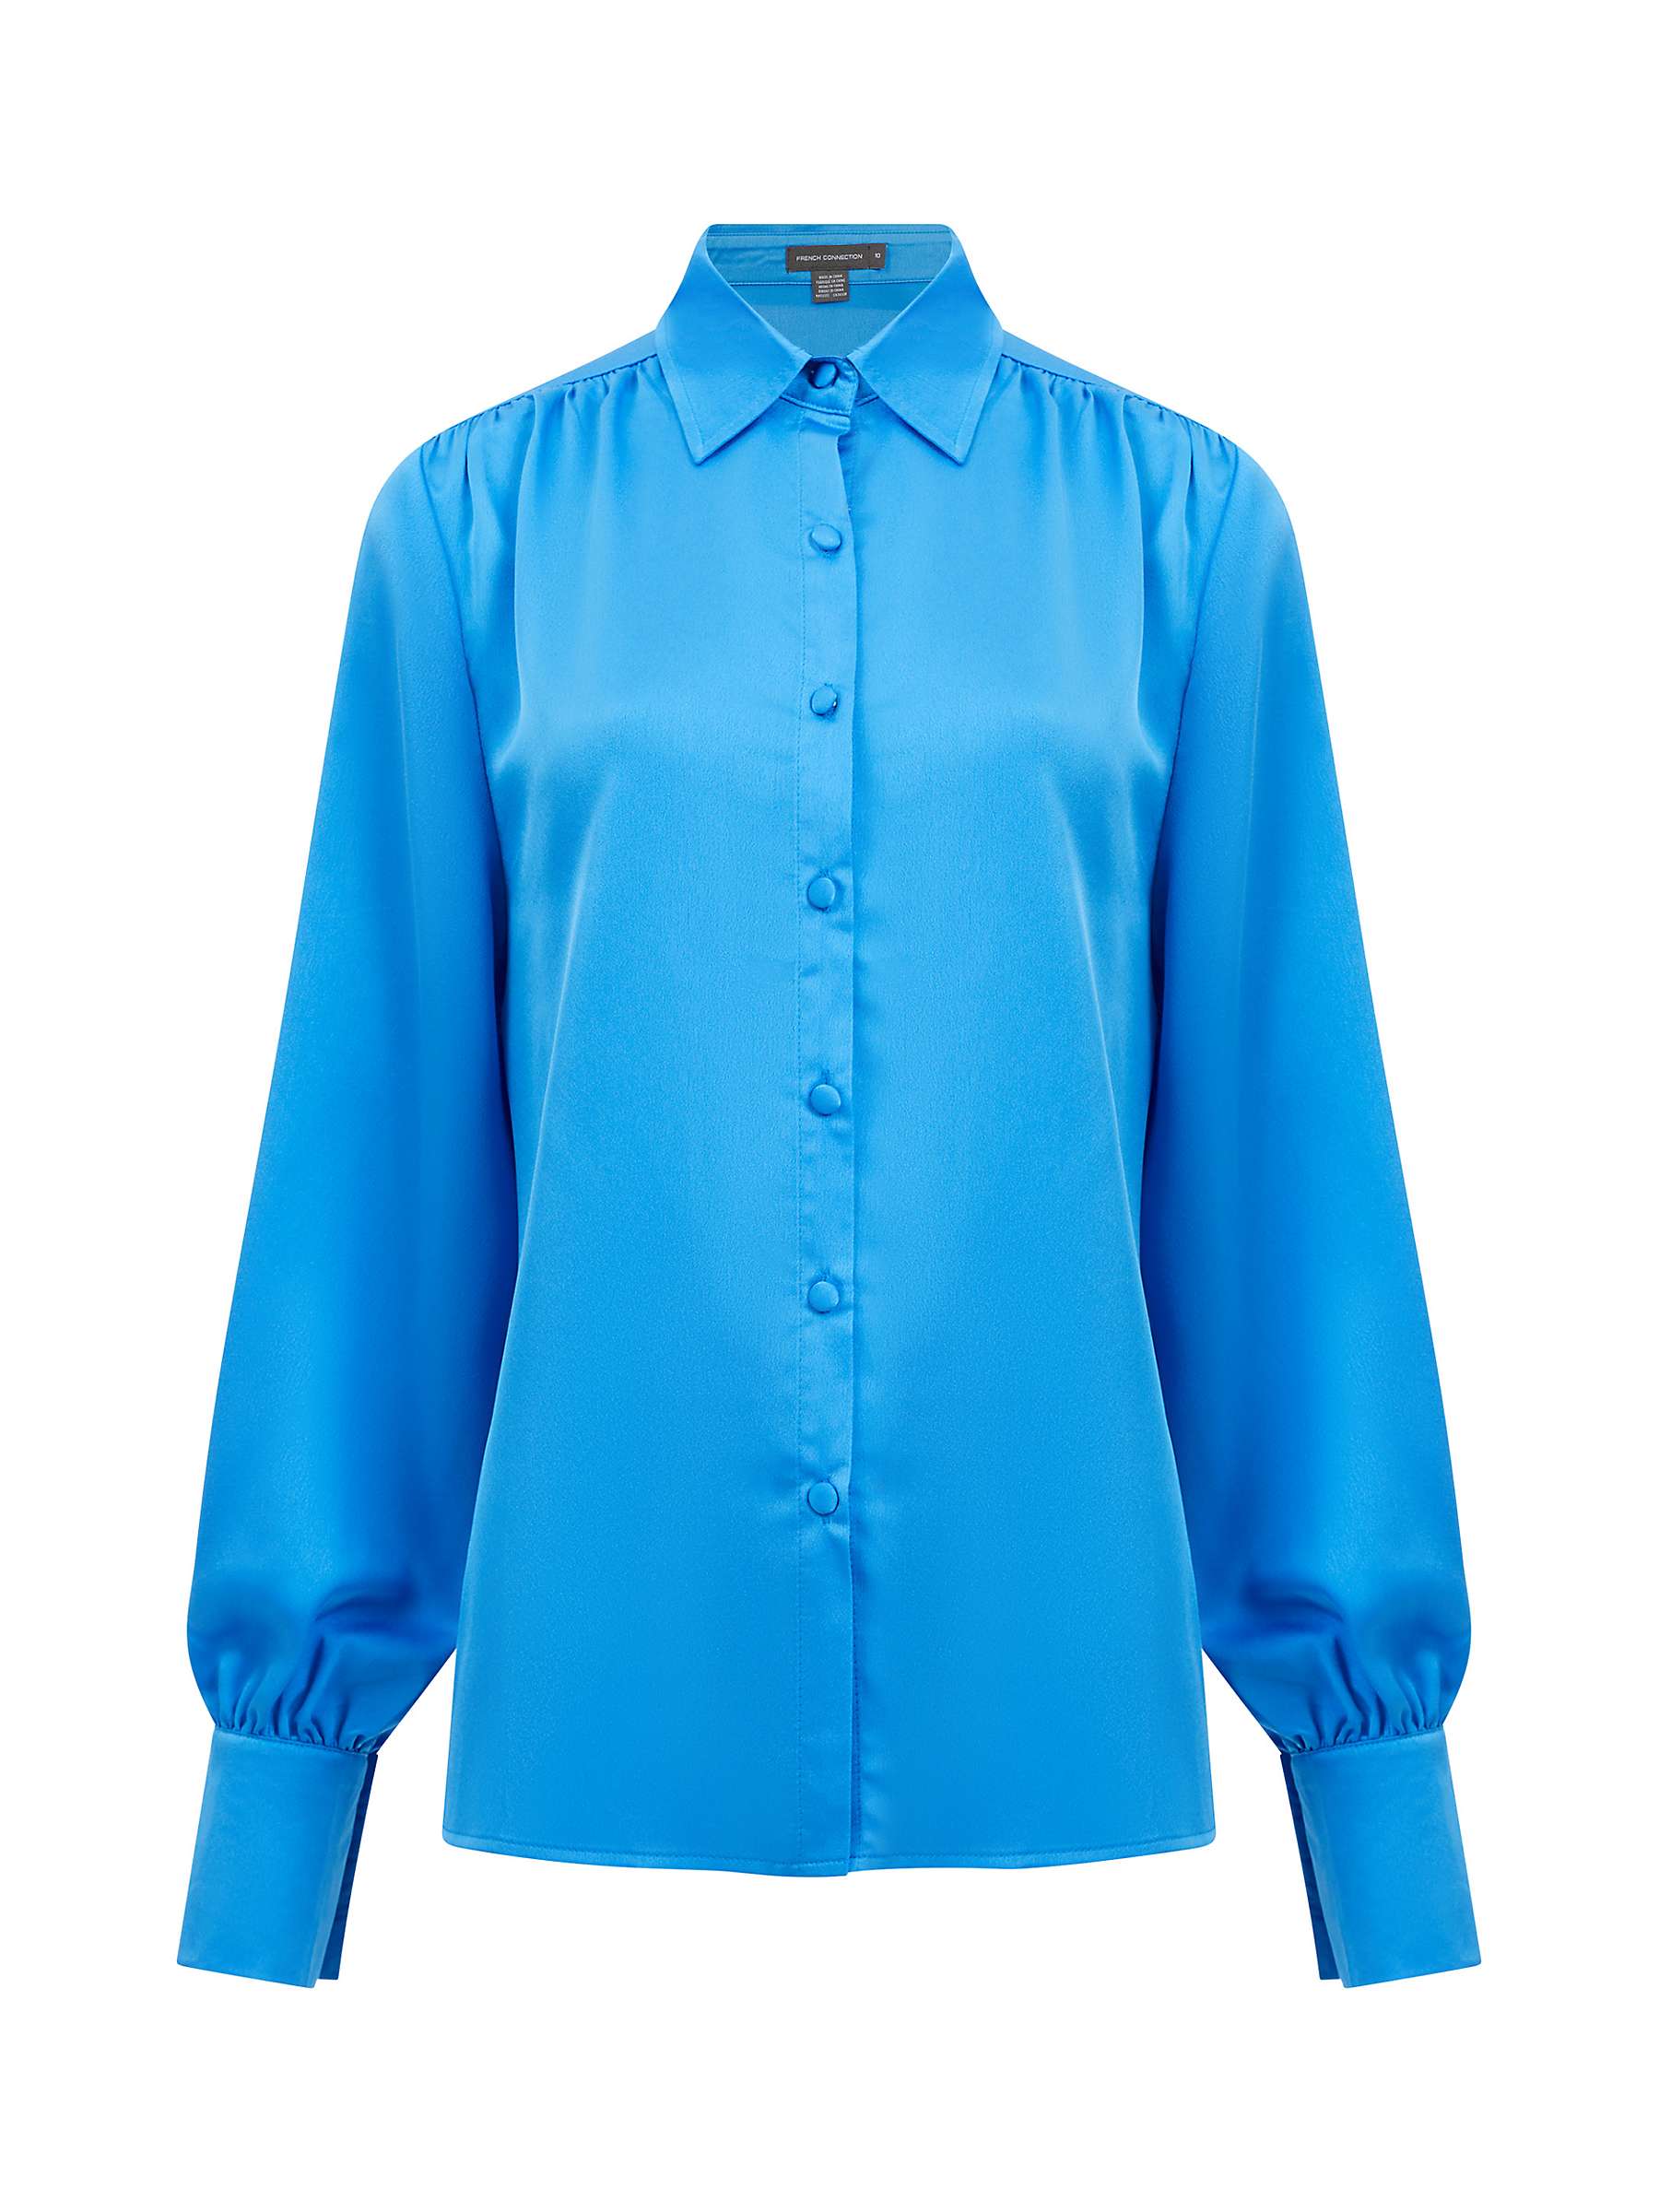 French Connection Satin Shirt, Nautical Blue at John Lewis & Partners